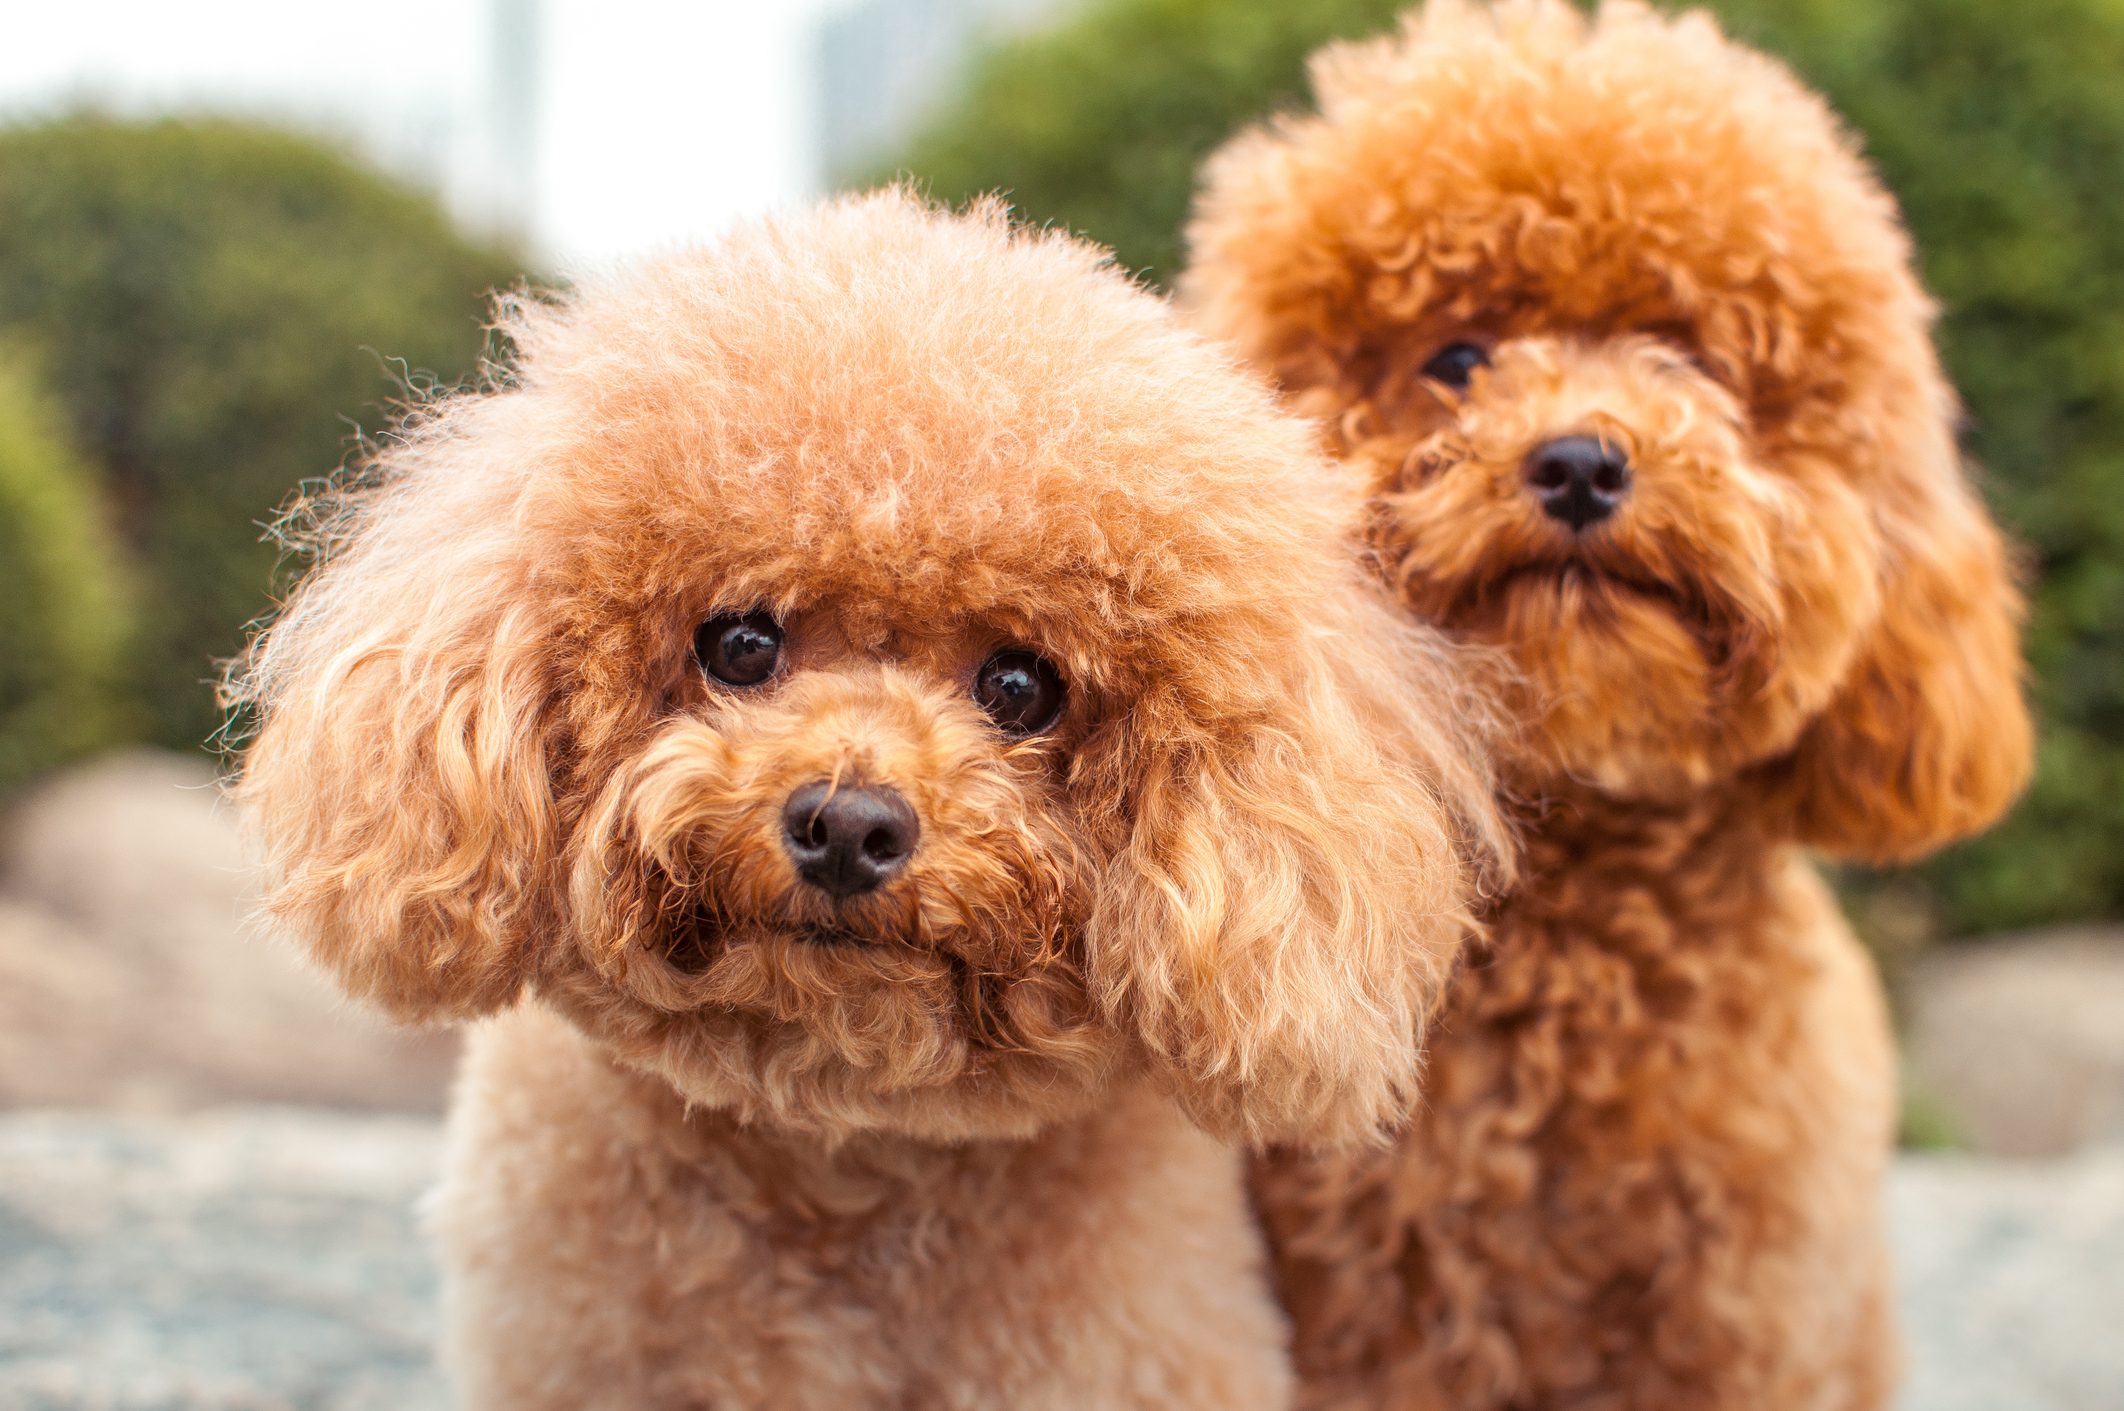 Two Miniture Poodles Starring at the camera.